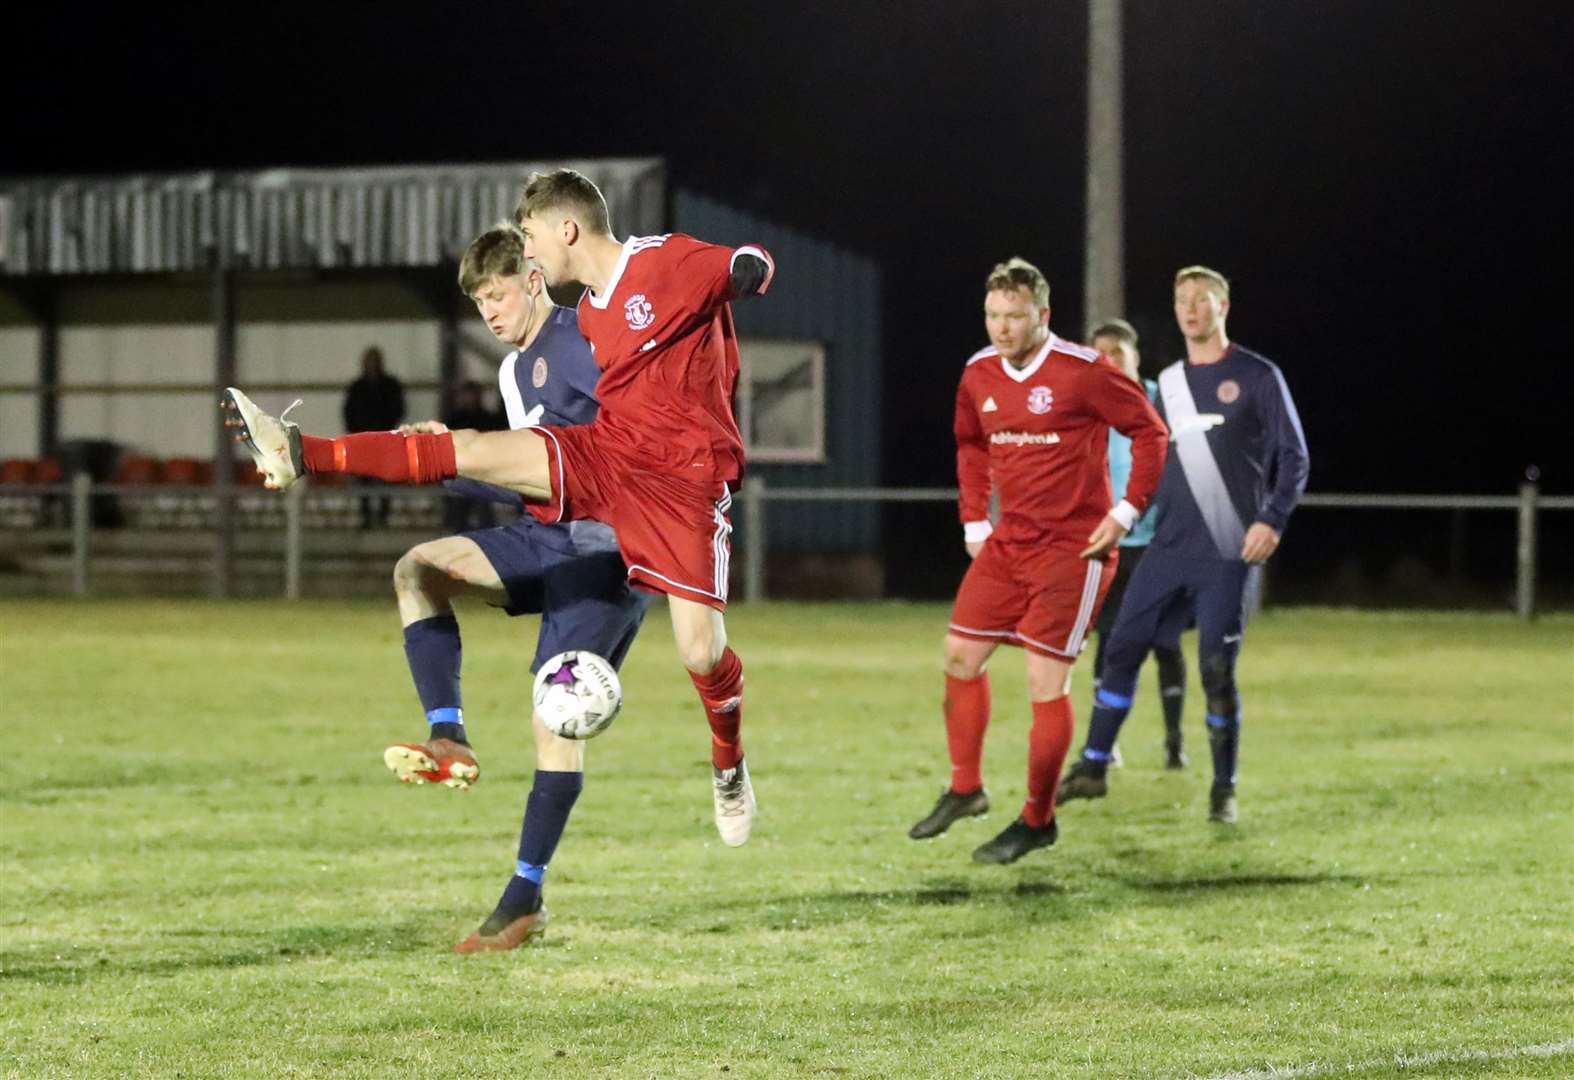 Thurso's Aaron Wilson blocks a shot from Halkirk United's Kuba Koziol during the 2-1 derby win at Morrison Park in midweek. Picture: James Gunn